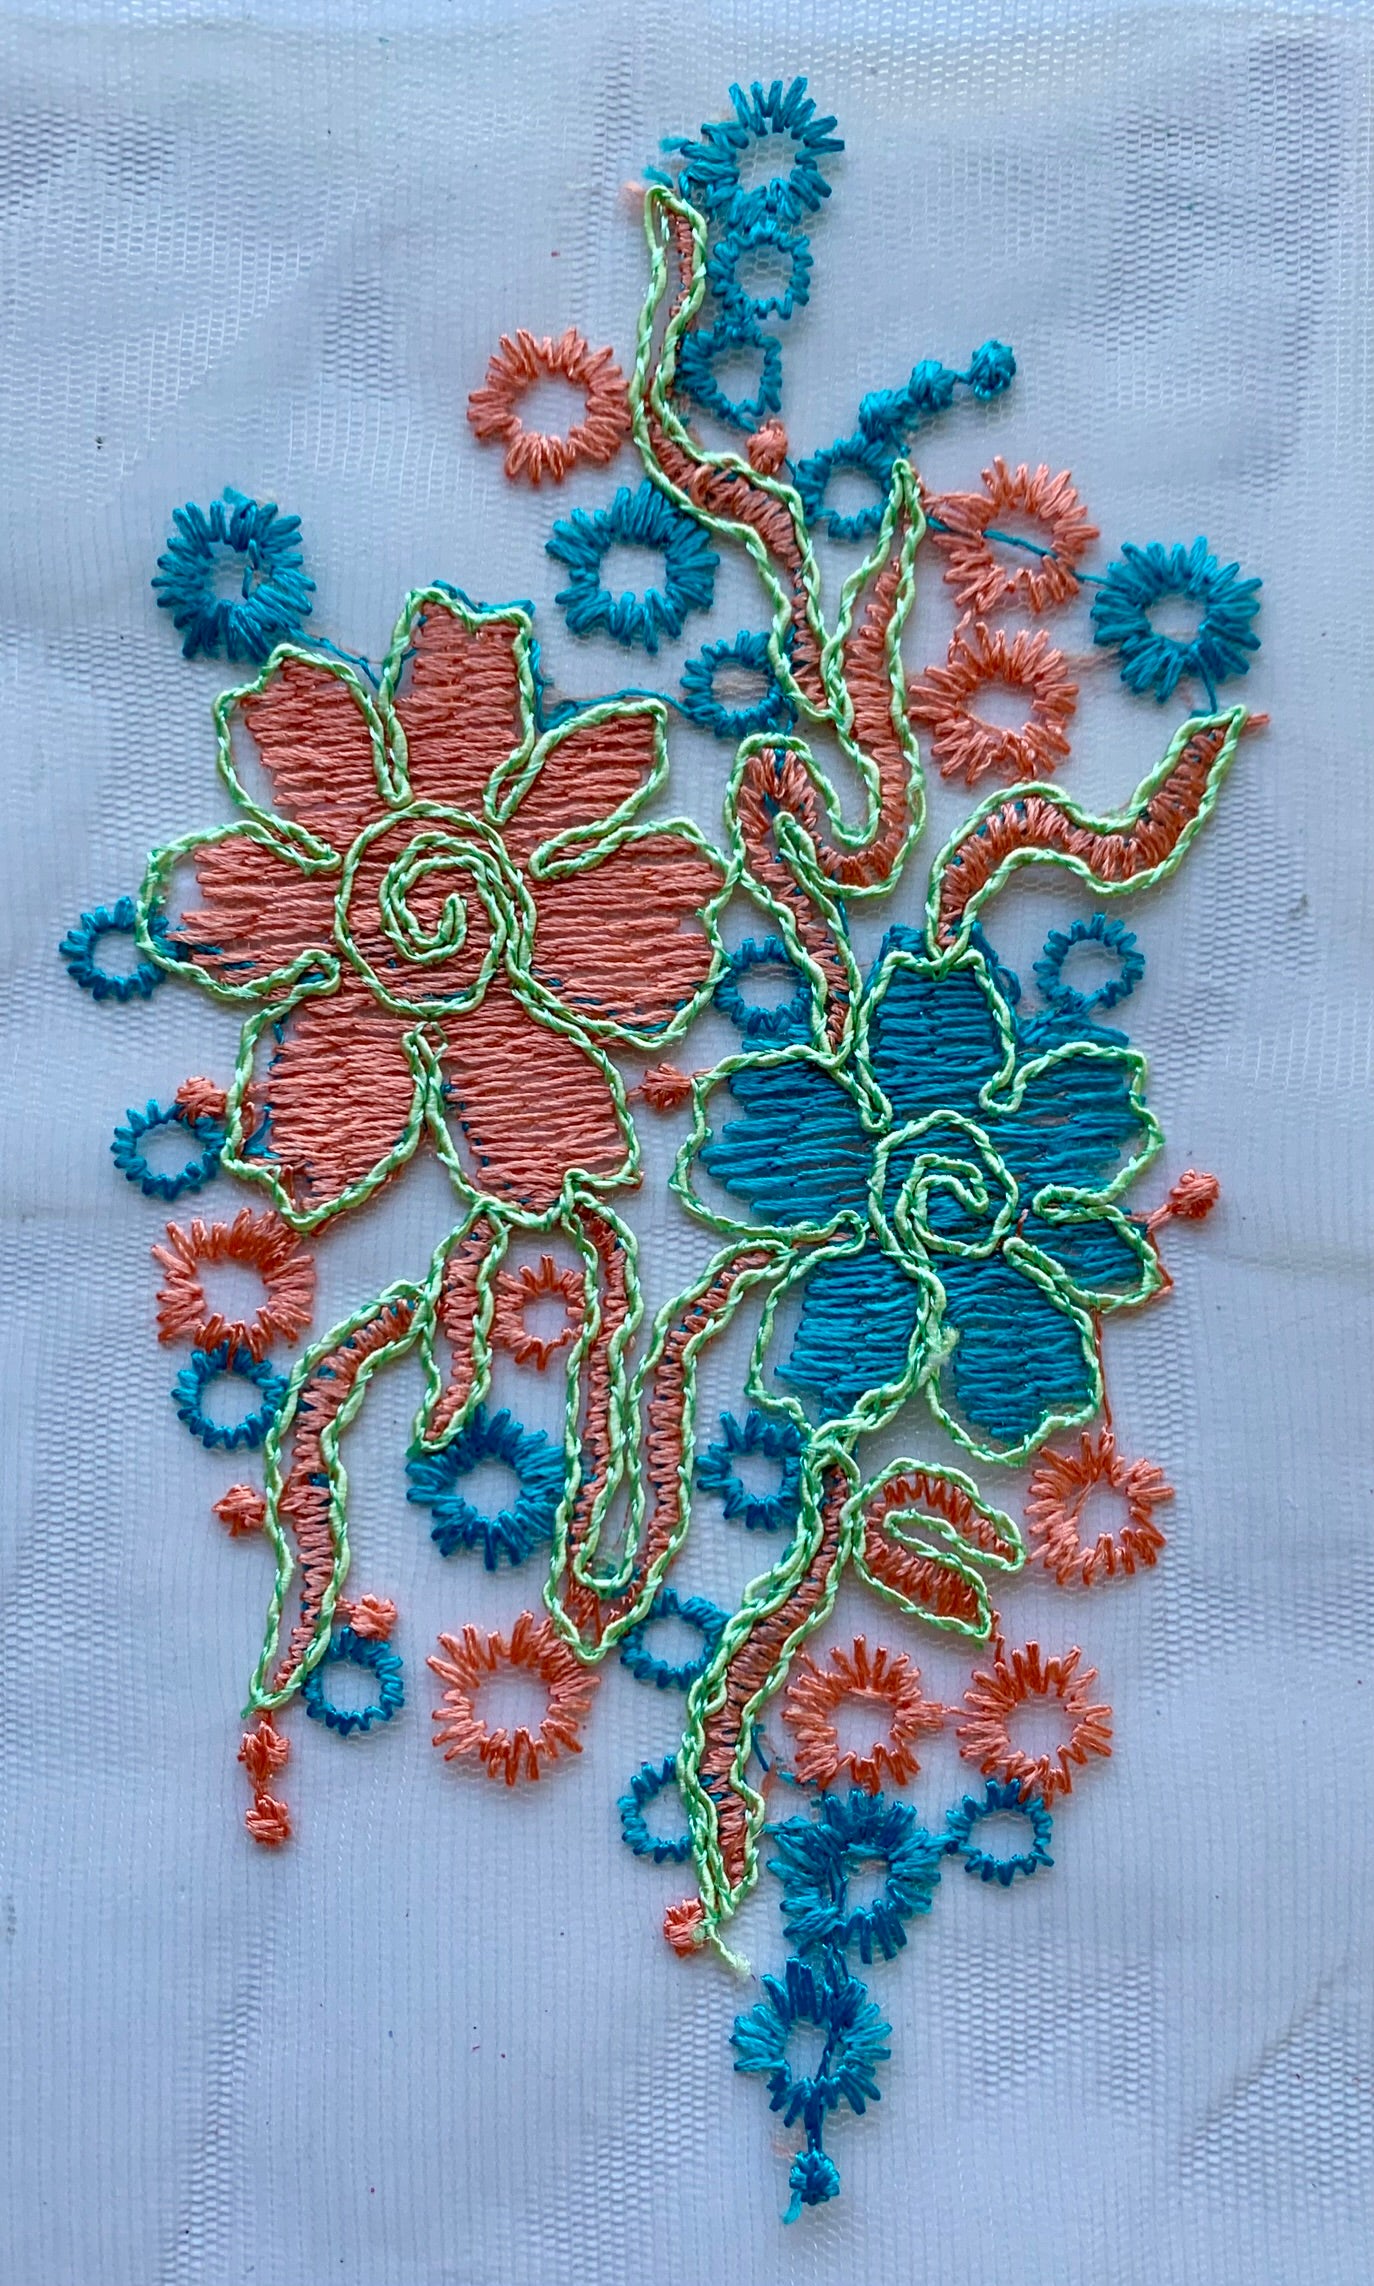 Turquoise and Apricot Applique - NLA#26